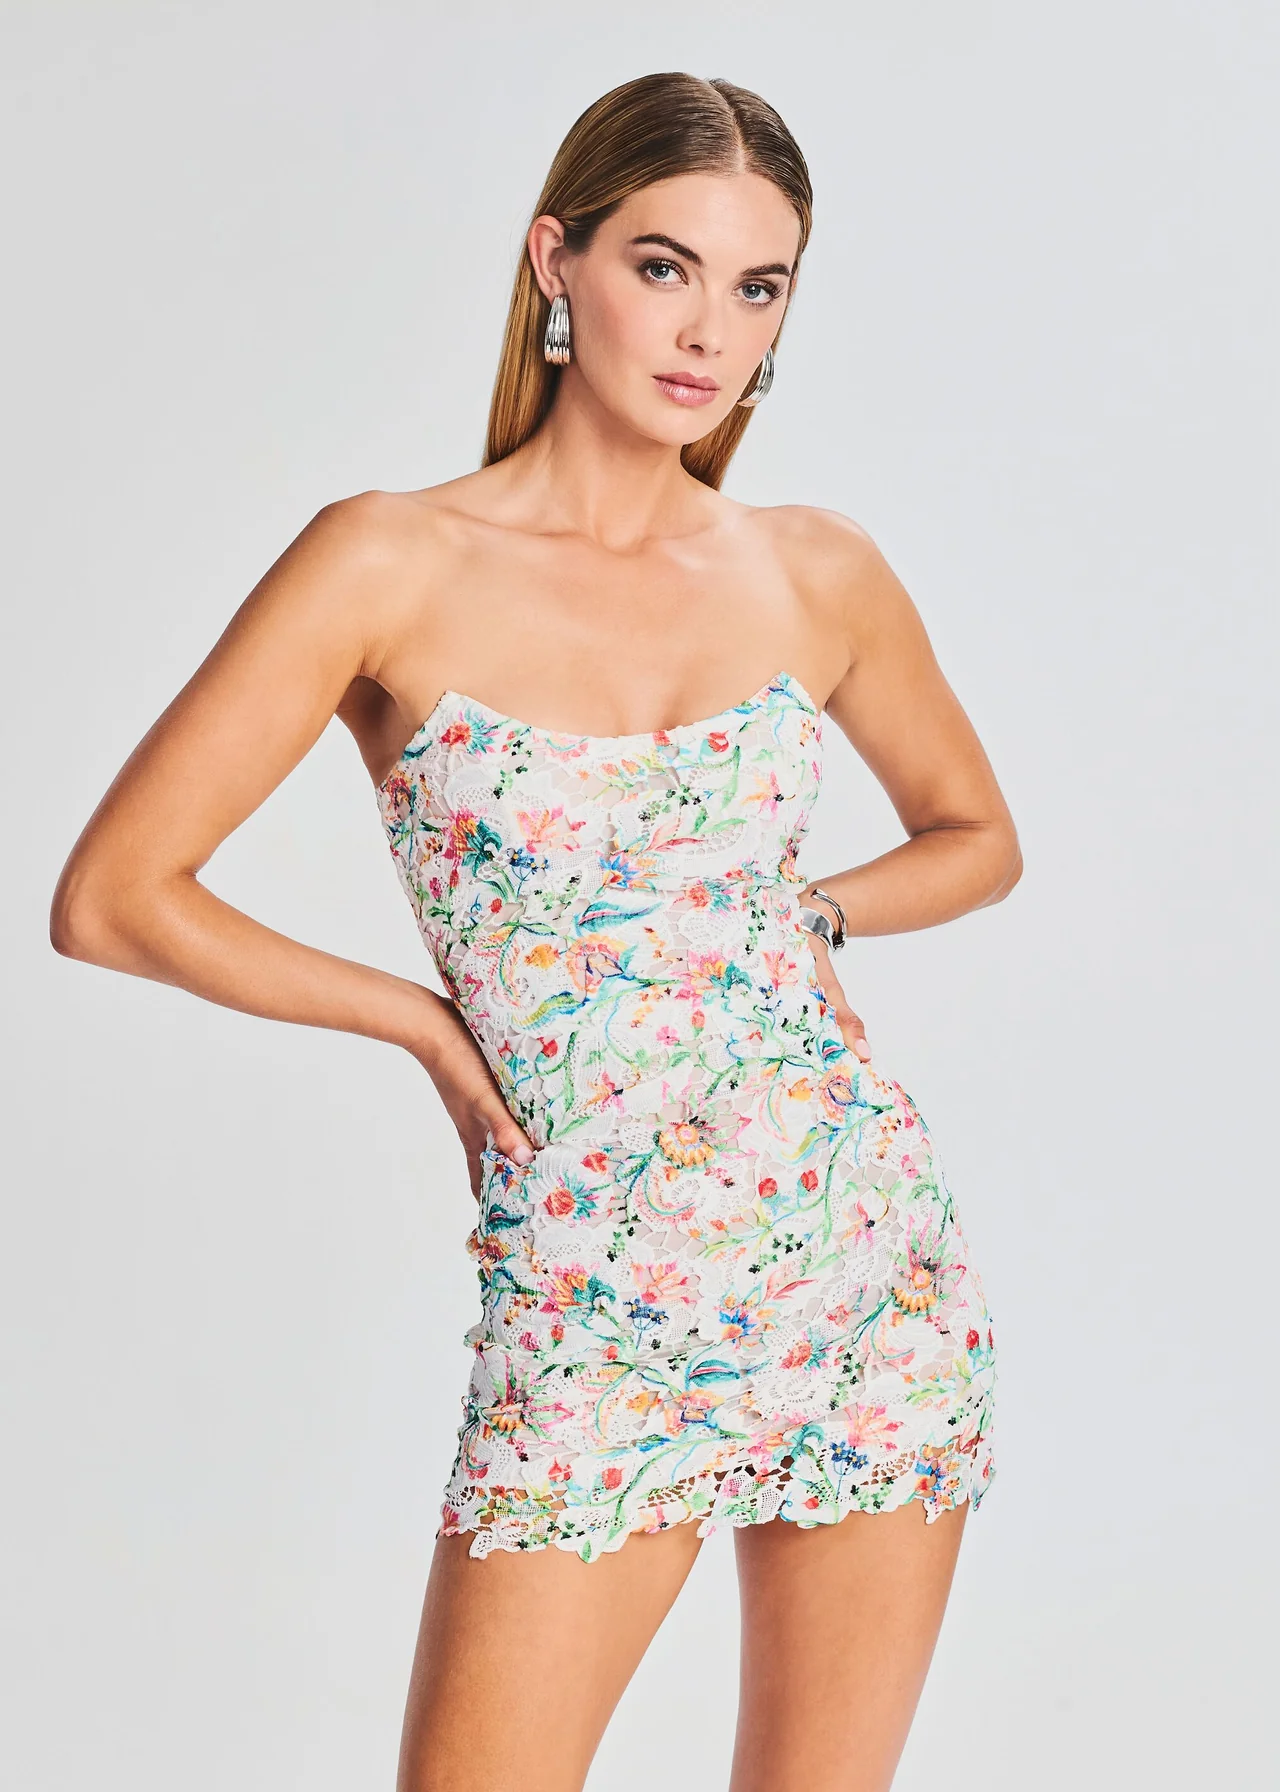 Rococo Sand mini white lace strapless scoop neck dress with colorful floral print. 